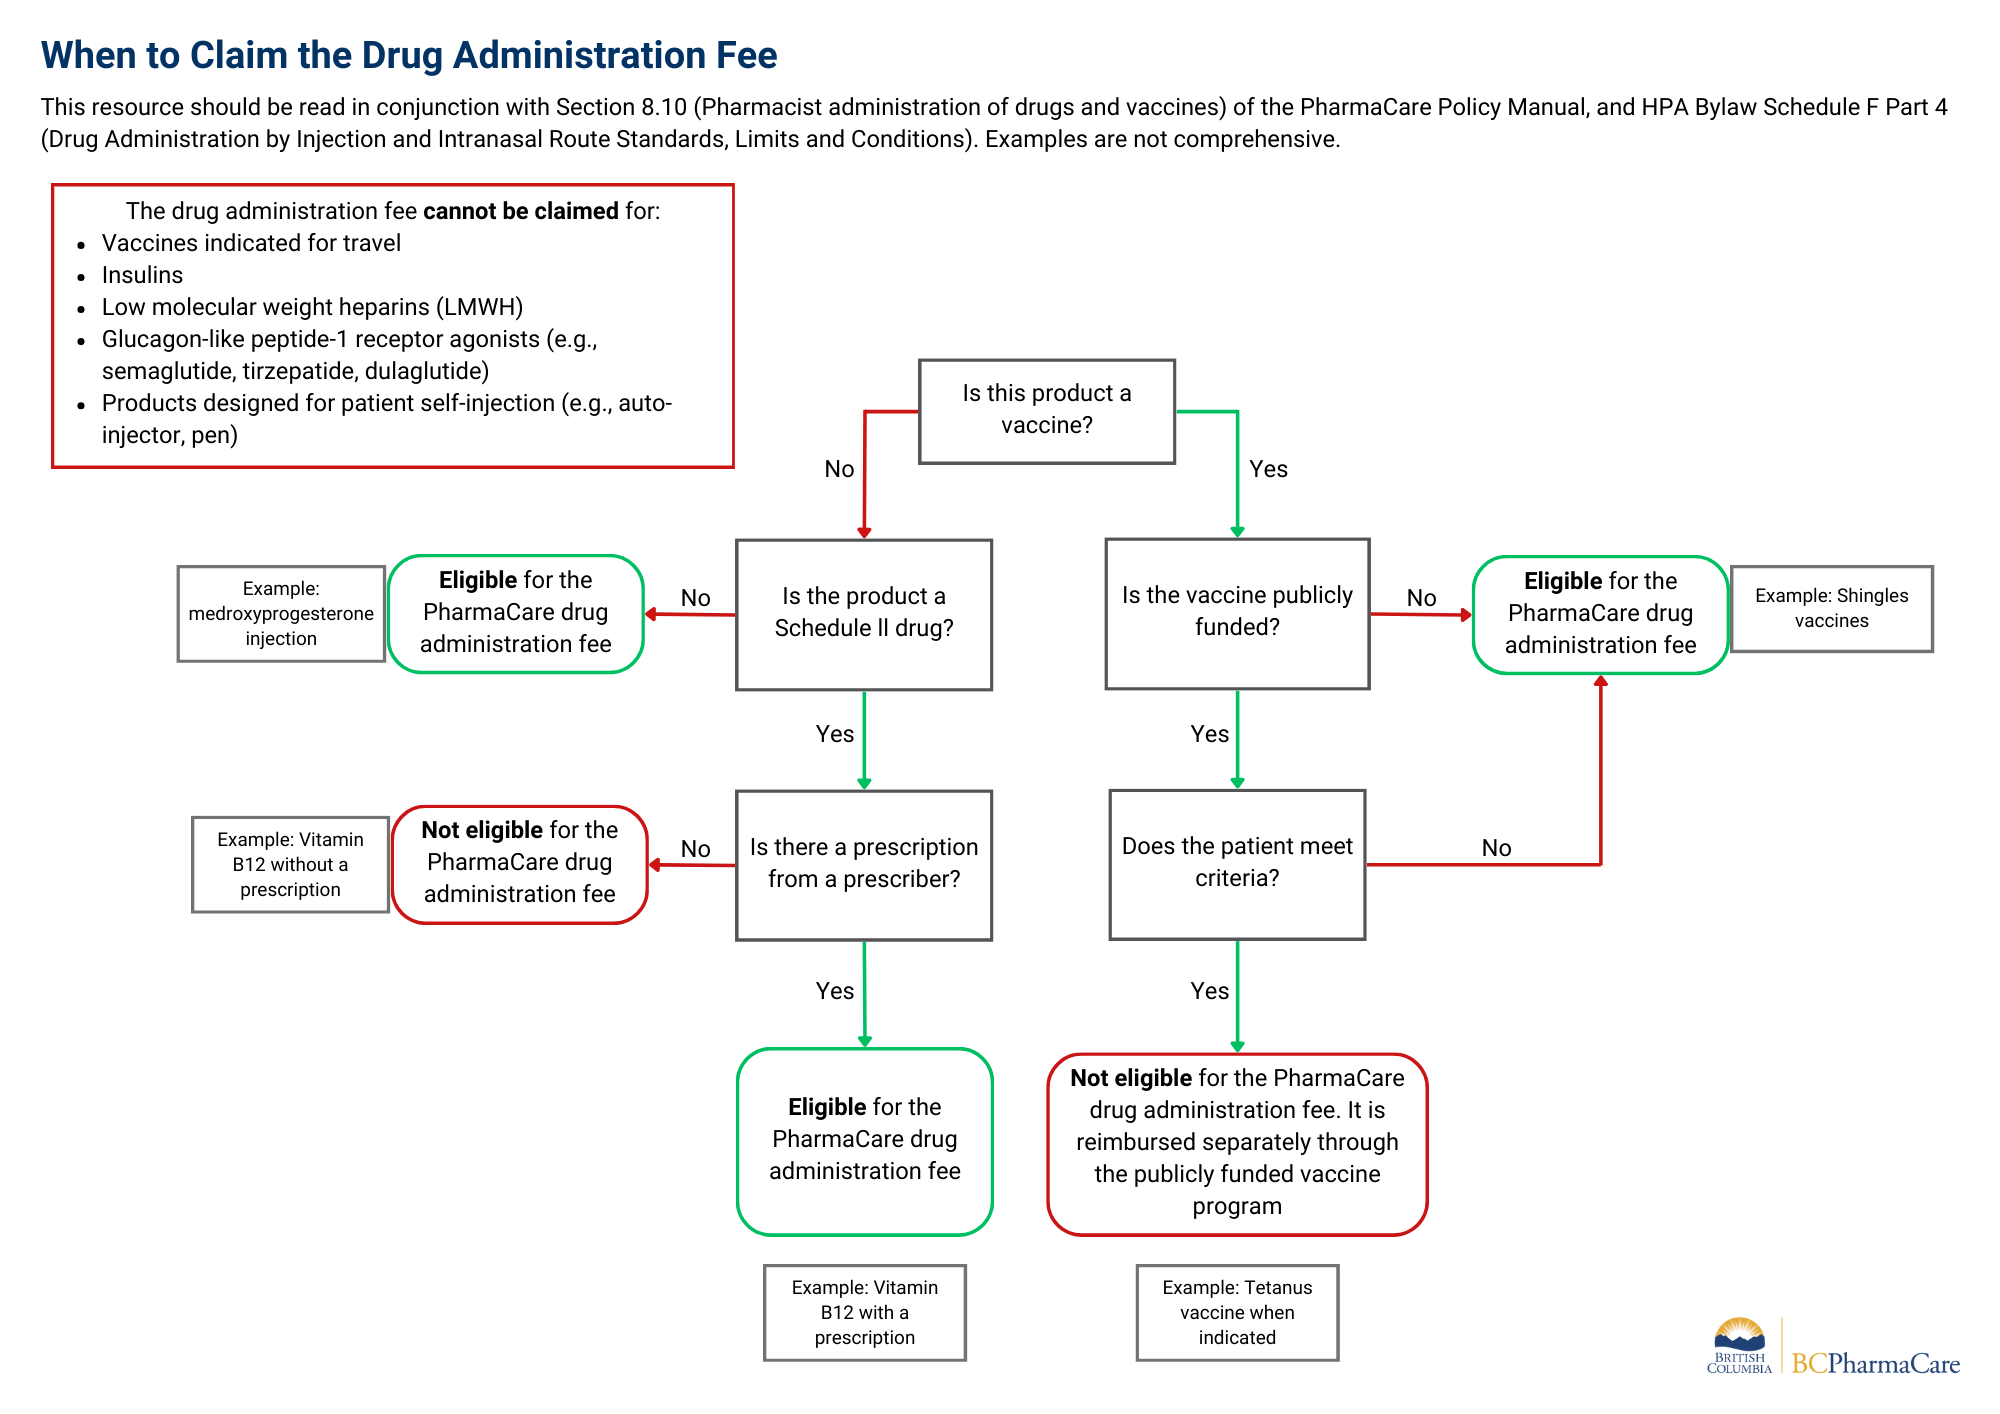 When to claim the drug administration fee flowchart